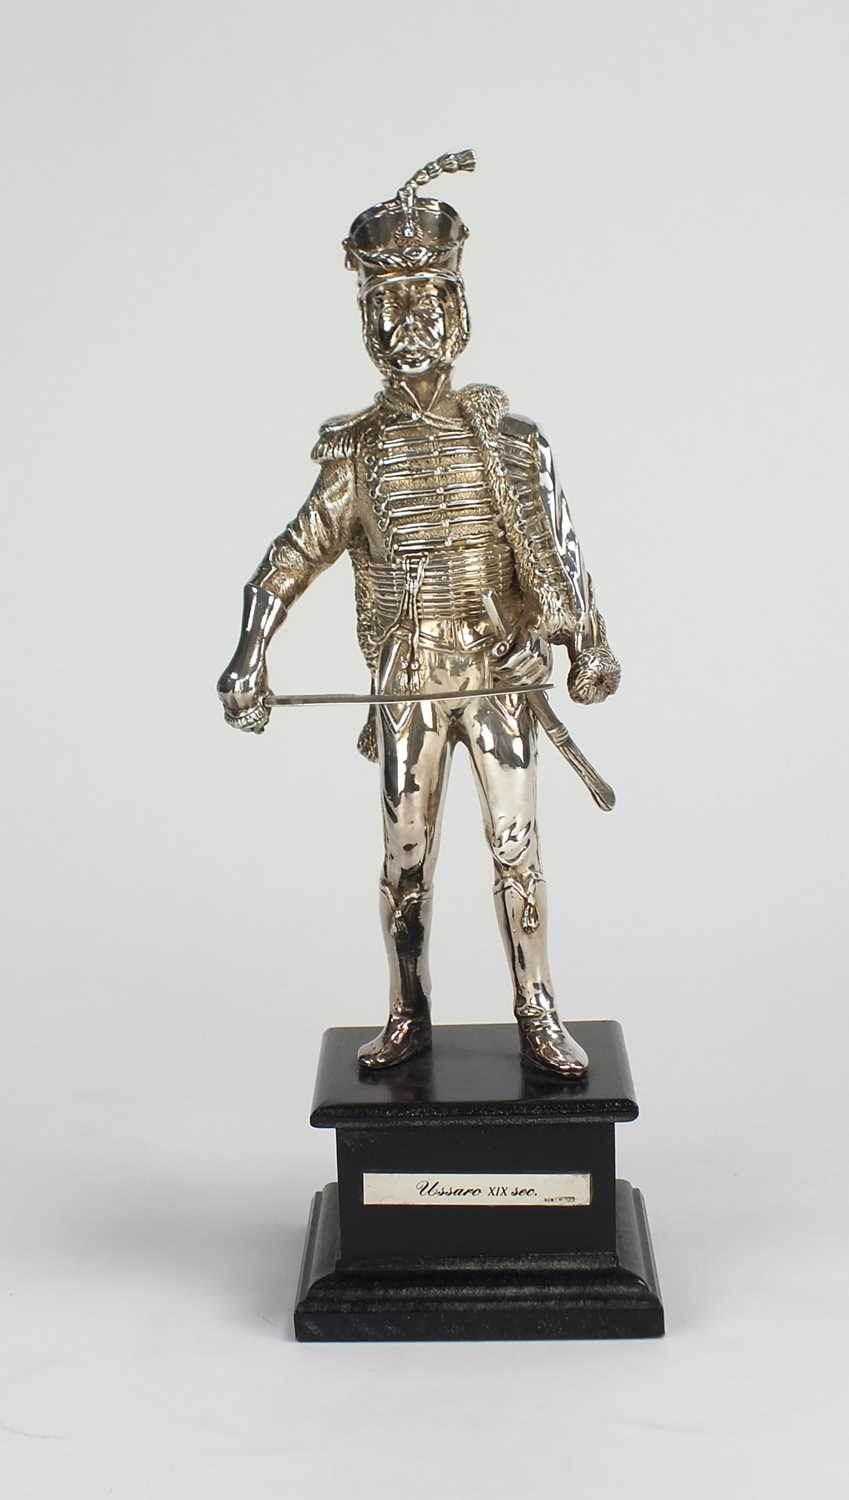 Lot 10 - A silver model of a 19th century solider